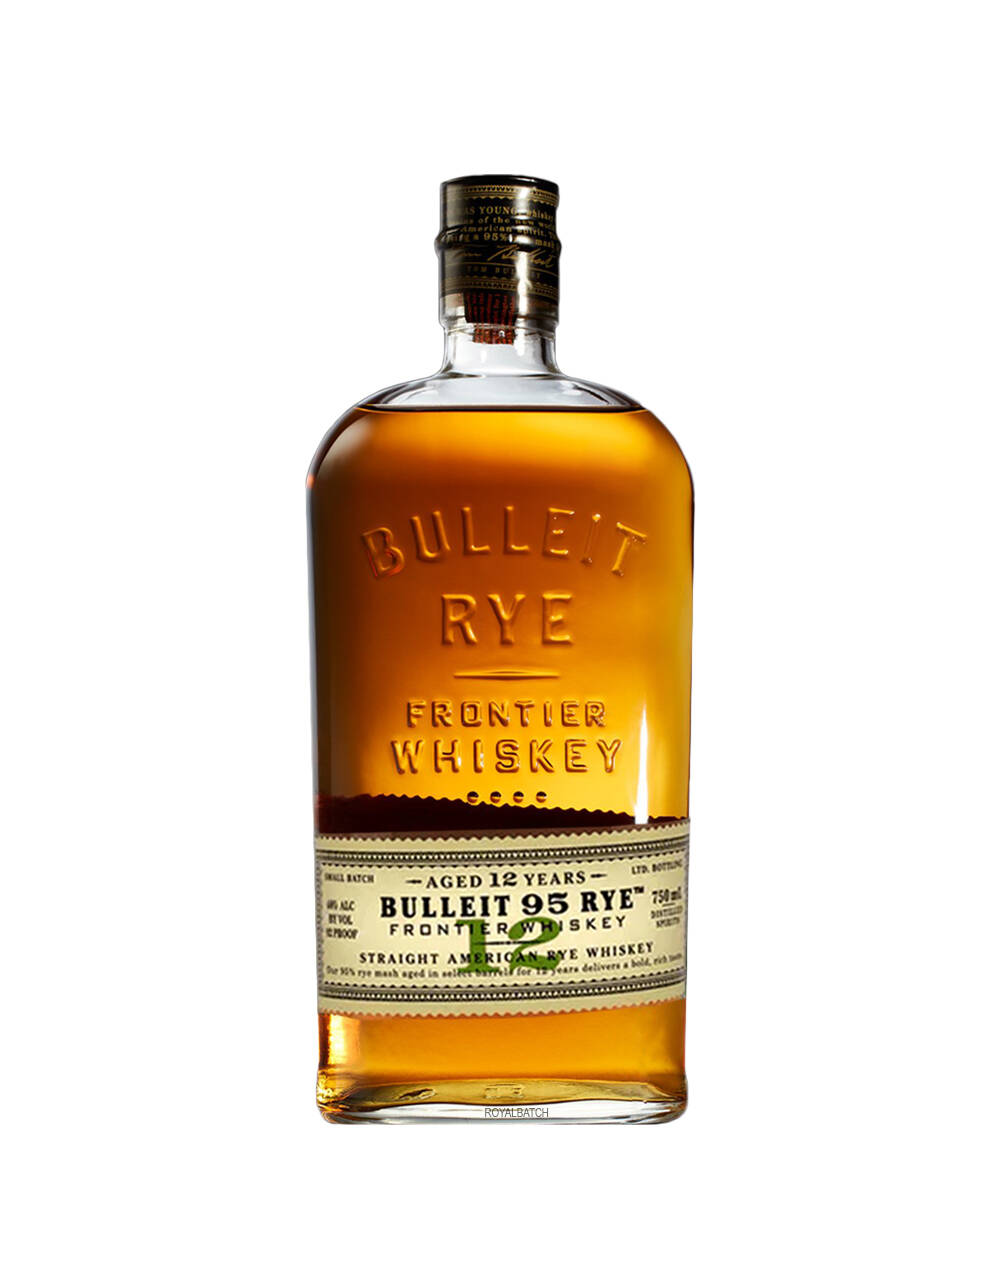 Bulleit 95 Rye 12 Year Old Frontier Whiskey